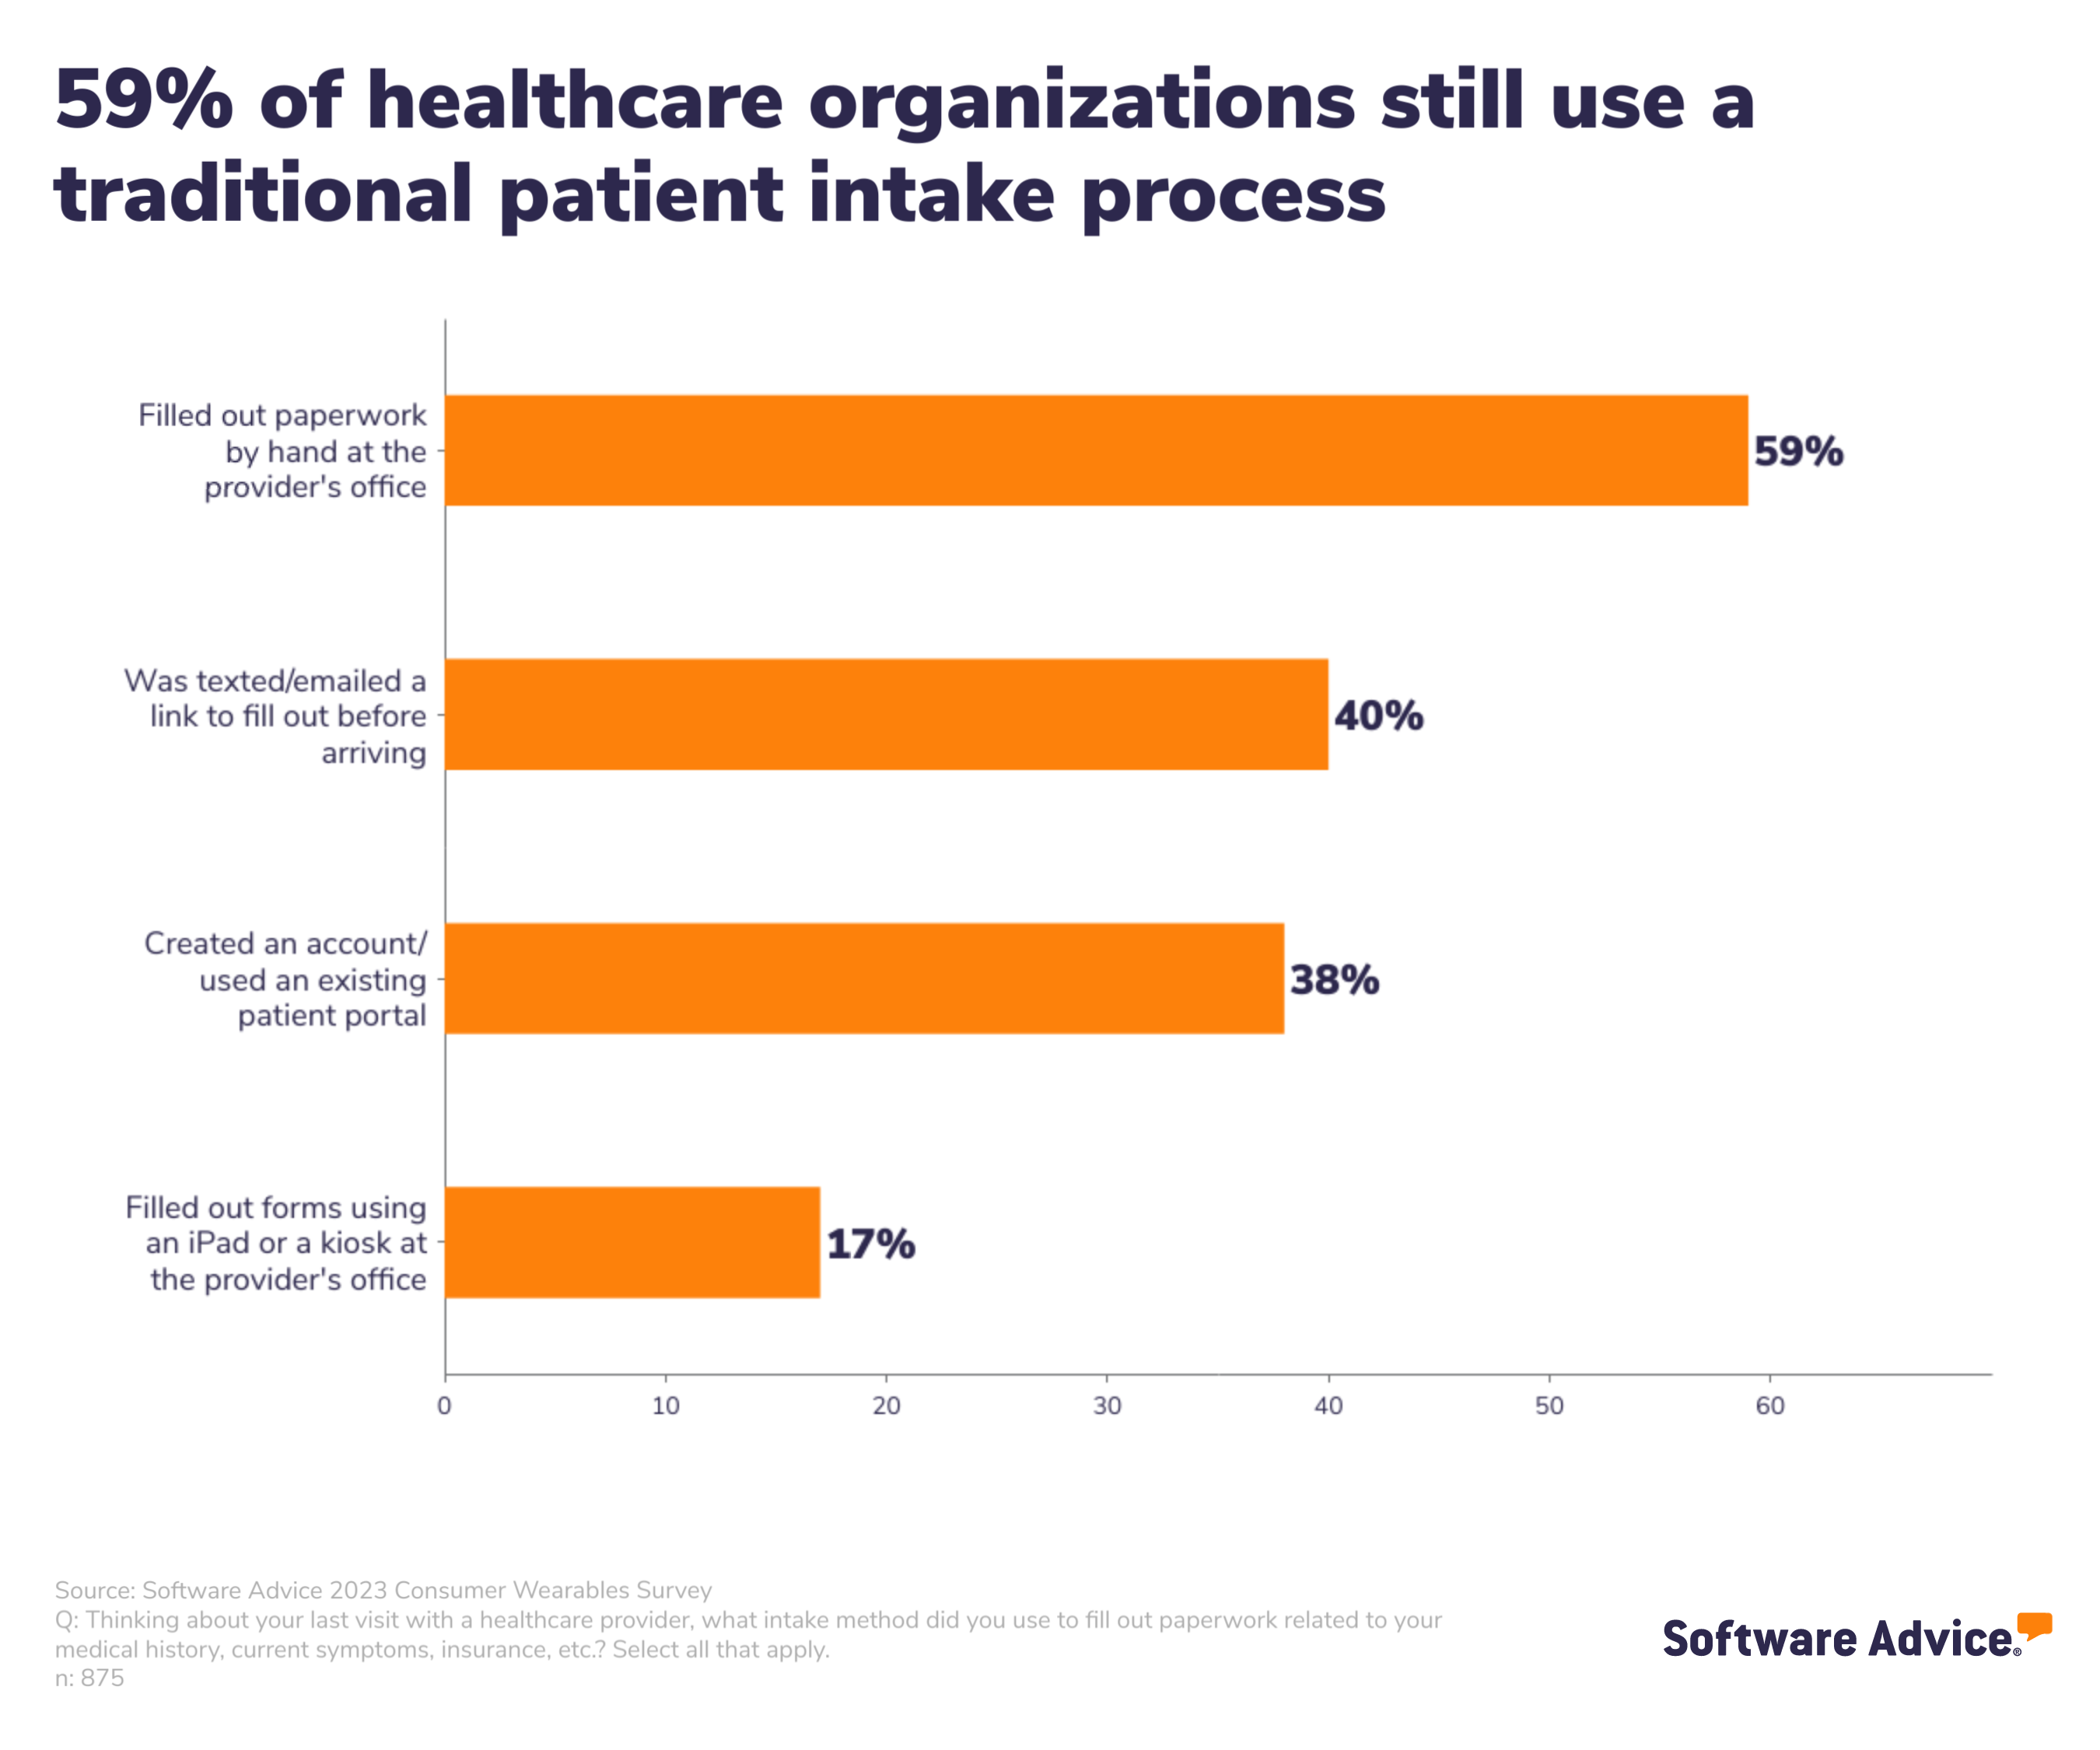 Percentage of healthcare orgs that still use traditional patient intake process